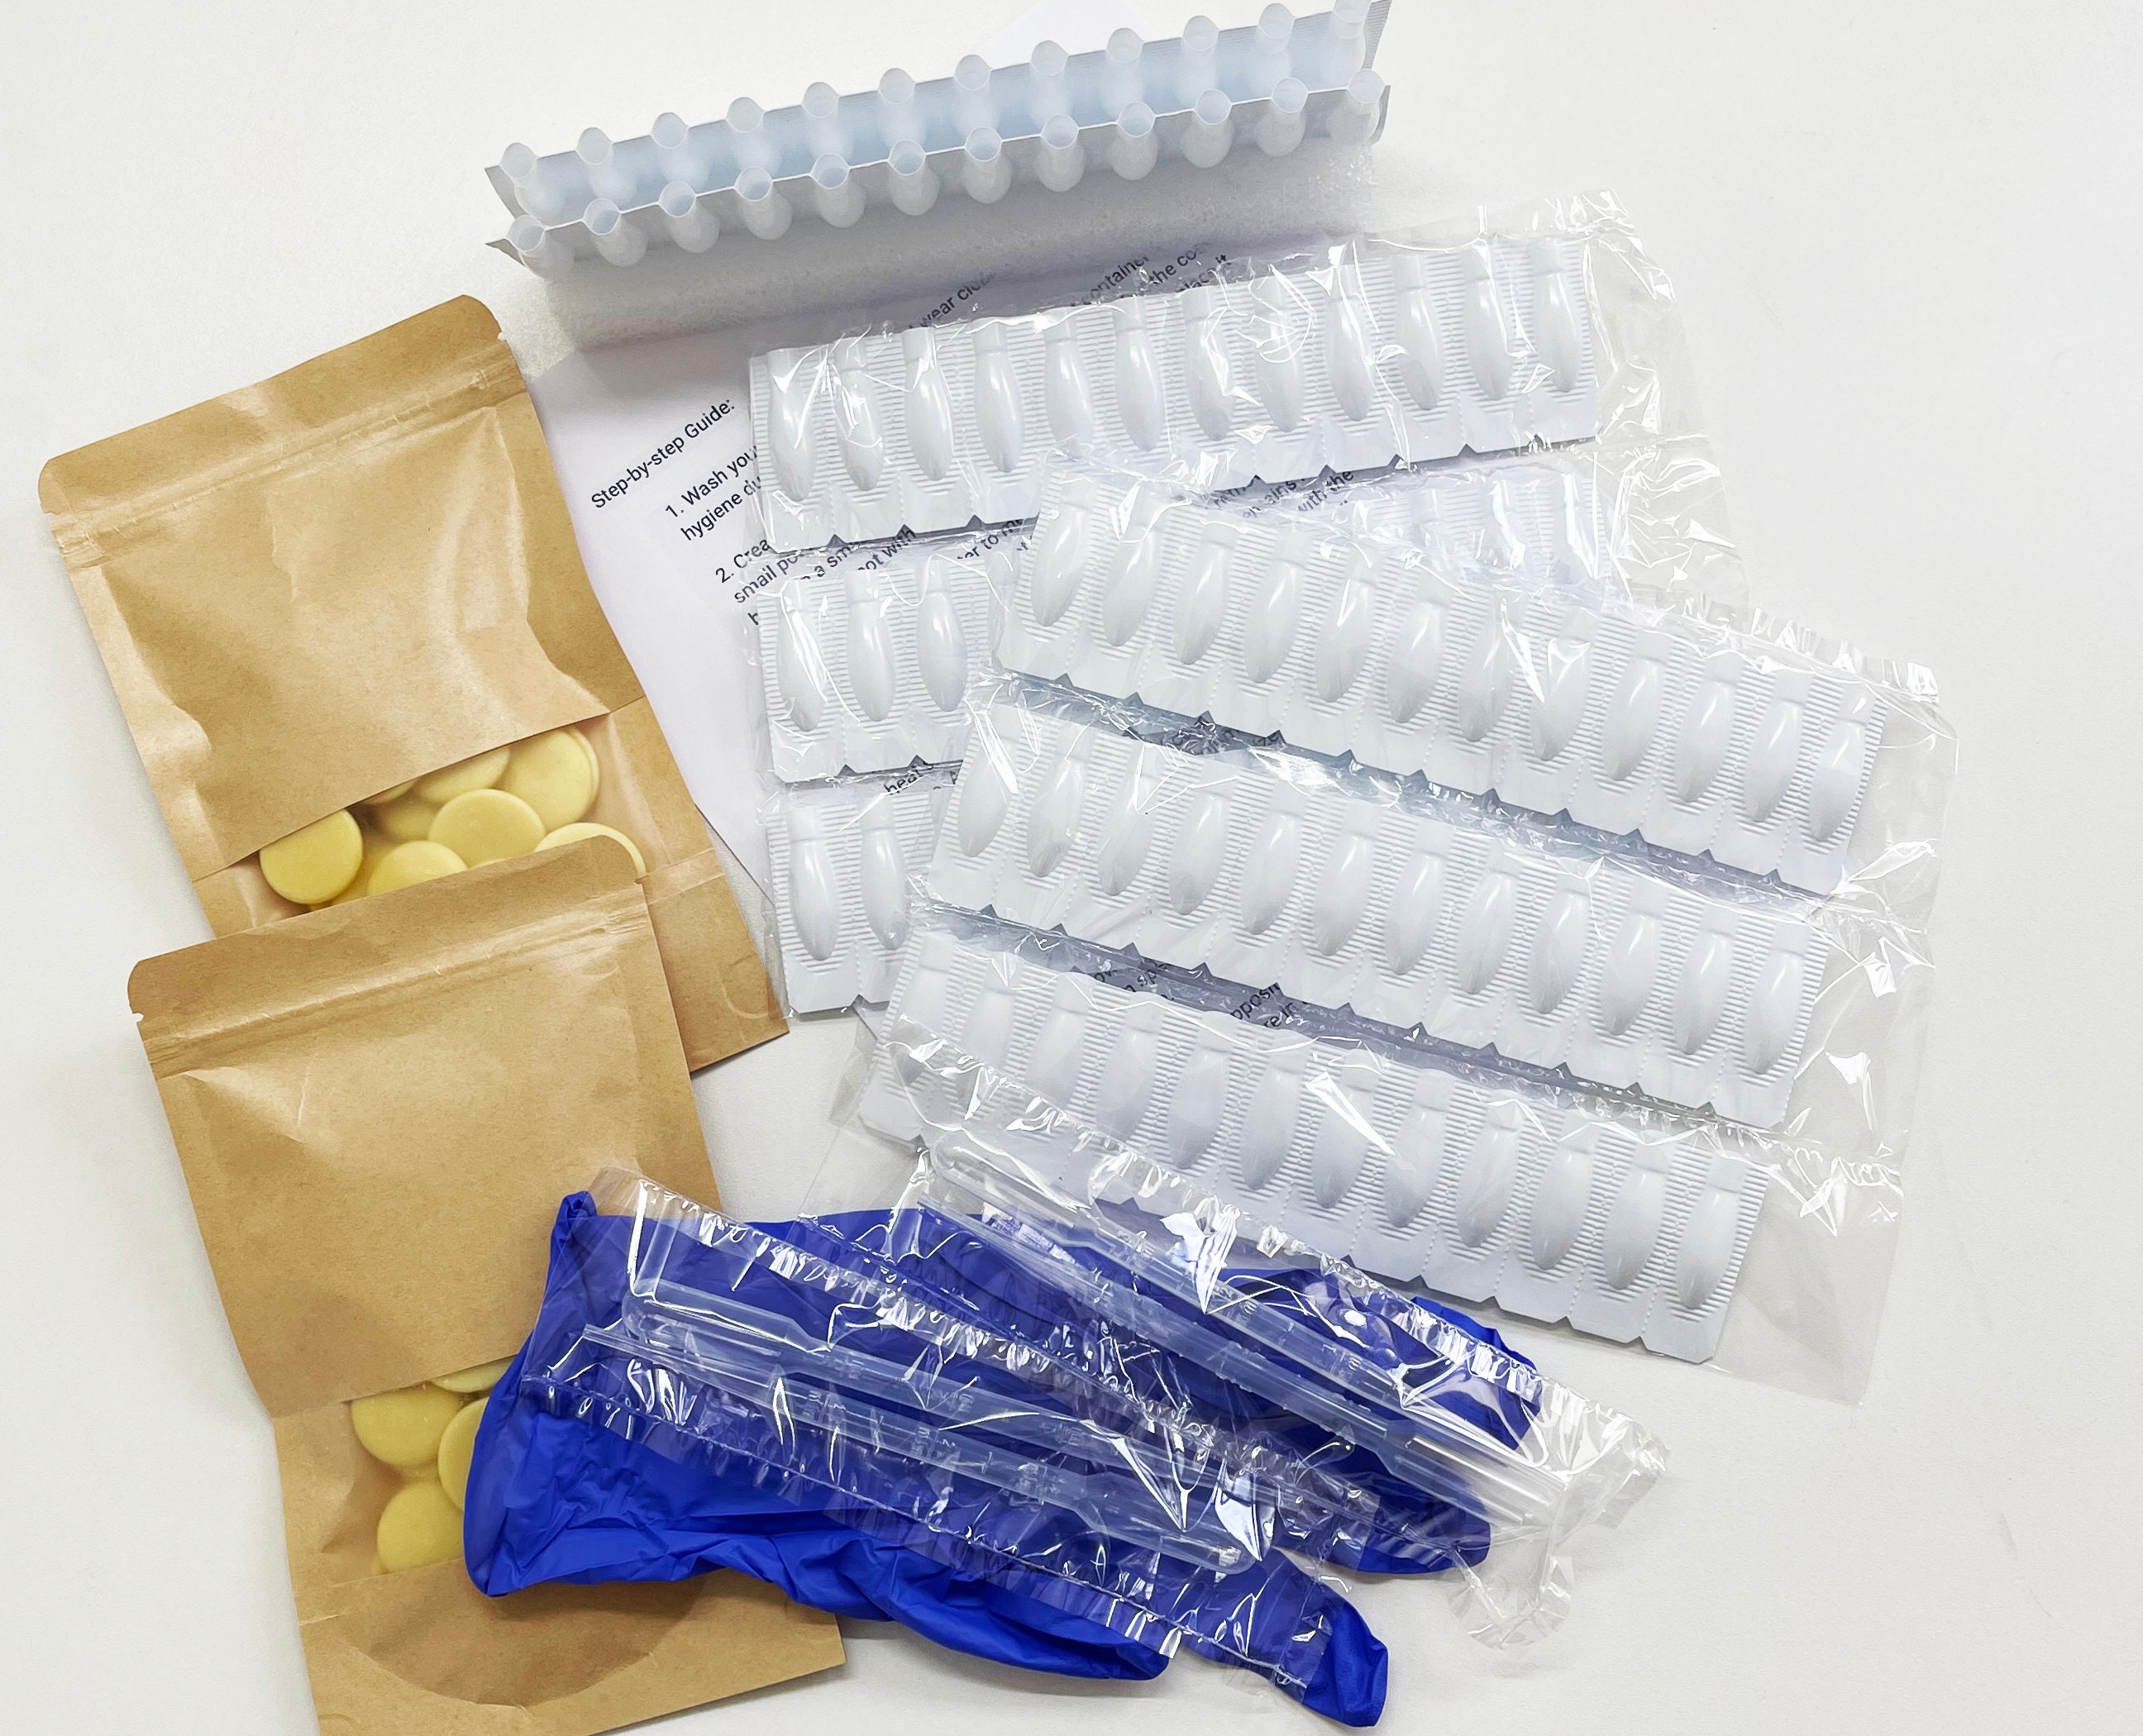 Suppository Molds Kit - Made in France, 3 Sizes (1ml, 2ml, 3ml), Reusable  Suppositories Mold - 4 Trays